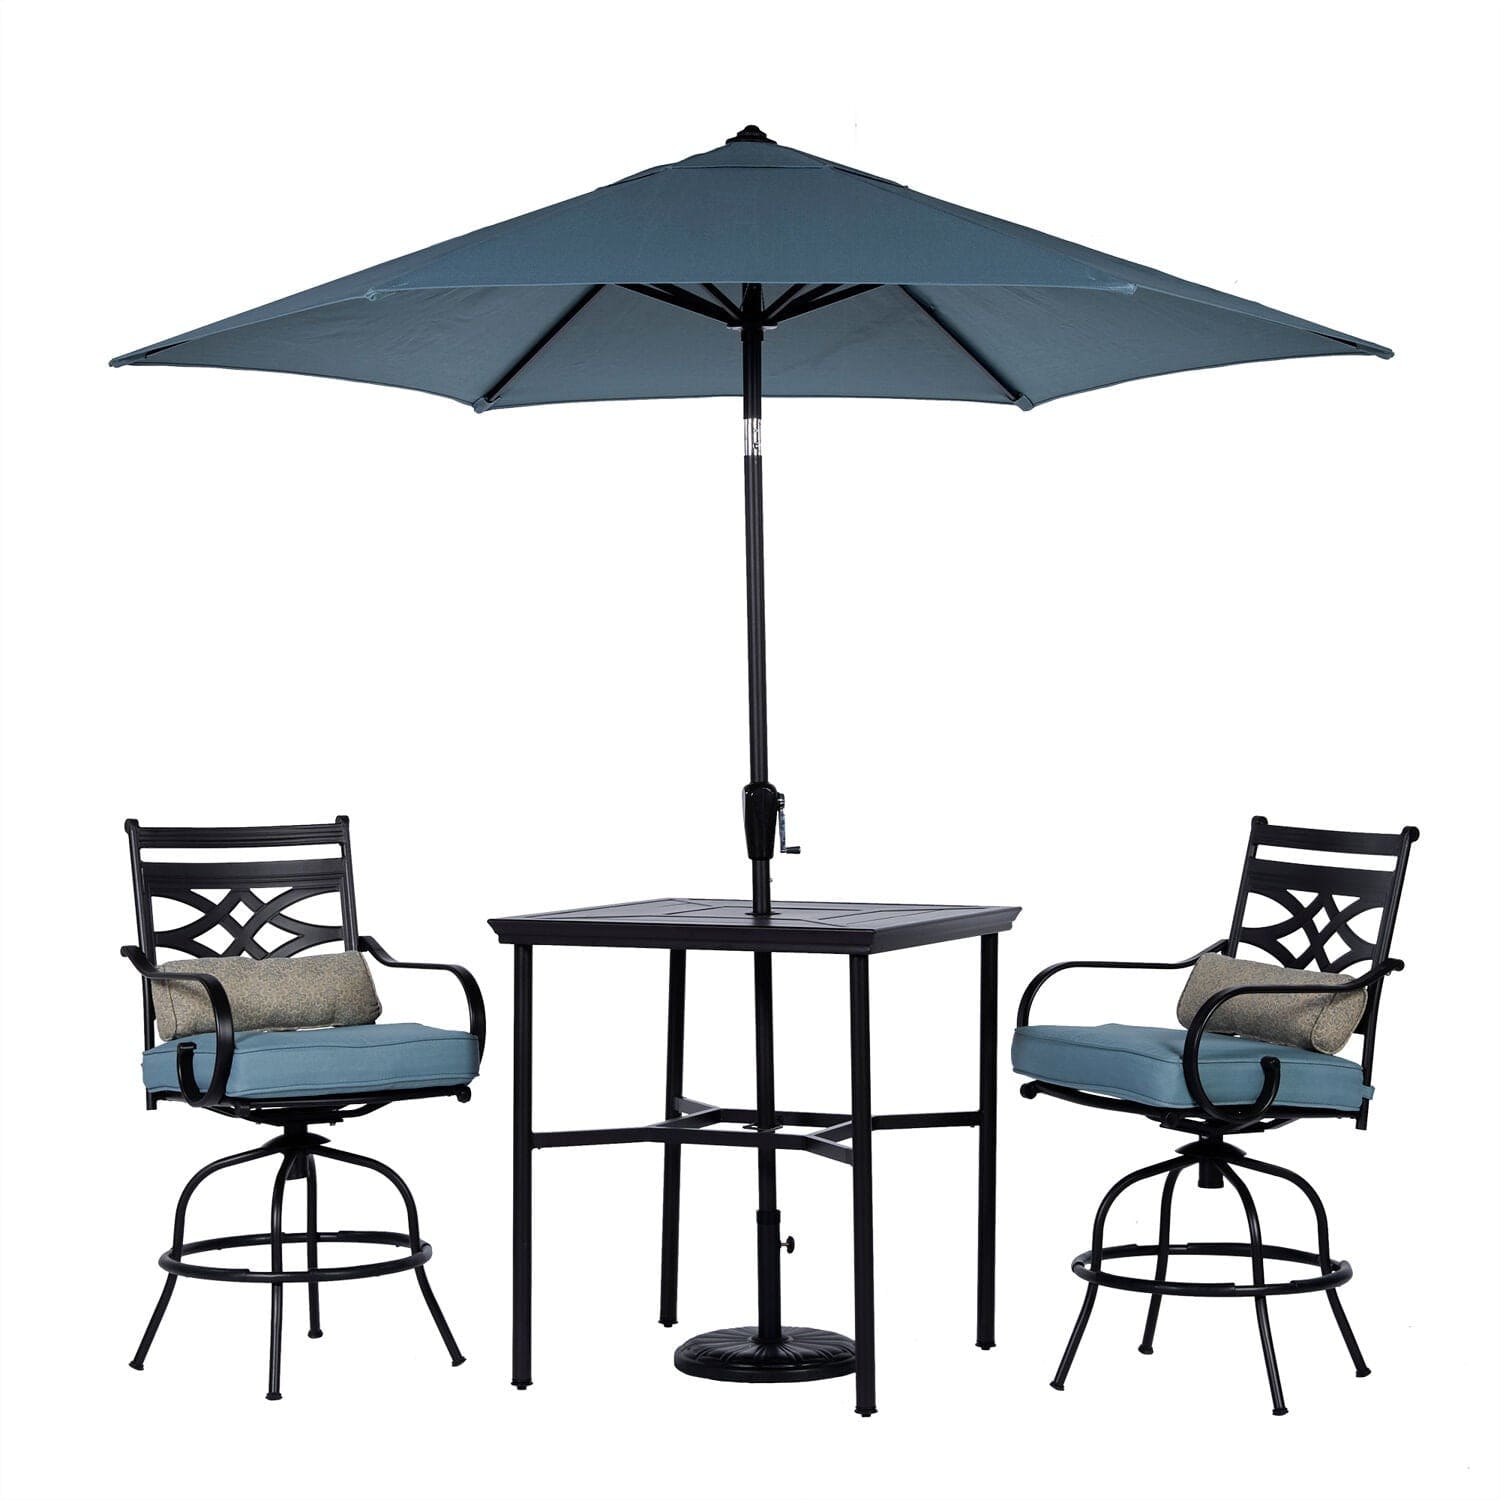 Hanover Outdoor Dining Set Hanover Montclair 3-Piece High-Dining Set in Ocean Blue with 2 Swivel Chairs, 33-Inch Square Table and 9-Ft. Umbrella | MCLRDN3PCBRSW2-SU-B